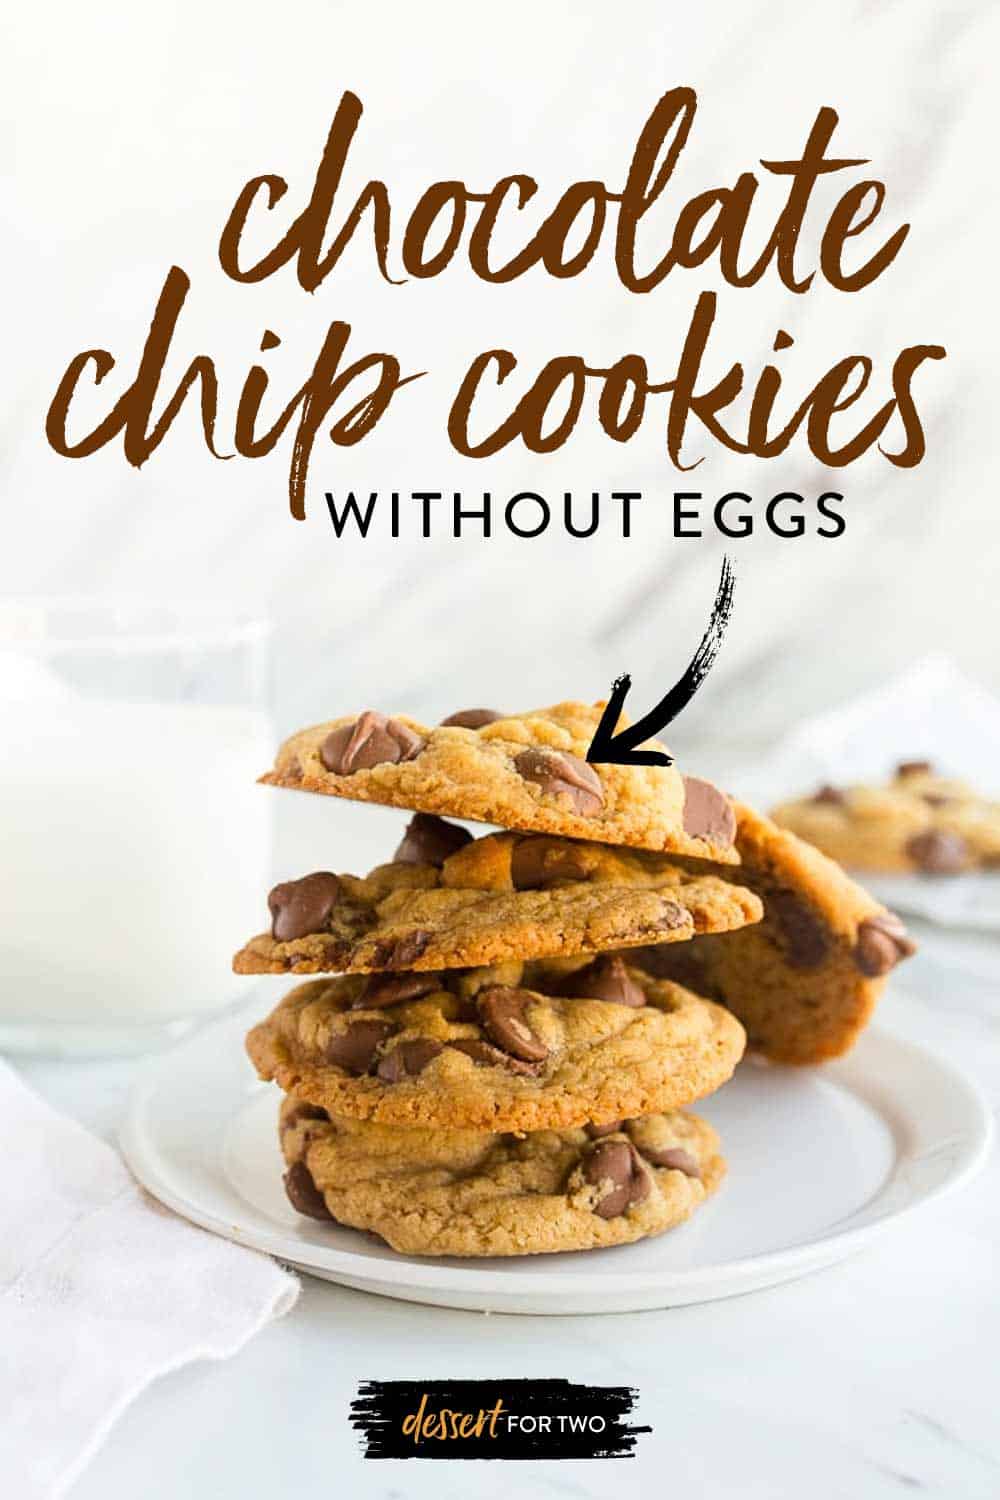 Chocolate chip cookies without eggs. Small batch chocolate chip cookie recipe makes just 8 cookies. Uses cream cheese instead of eggs for chewy, fluffy cookies! #eggless #noeggs #withouteggs #chocolatechipcookieswithouteggs #chocolatechipcookies #cookieswithouteggs #eggfree #smallbatchchocolatechipcookies #cookingfortwo